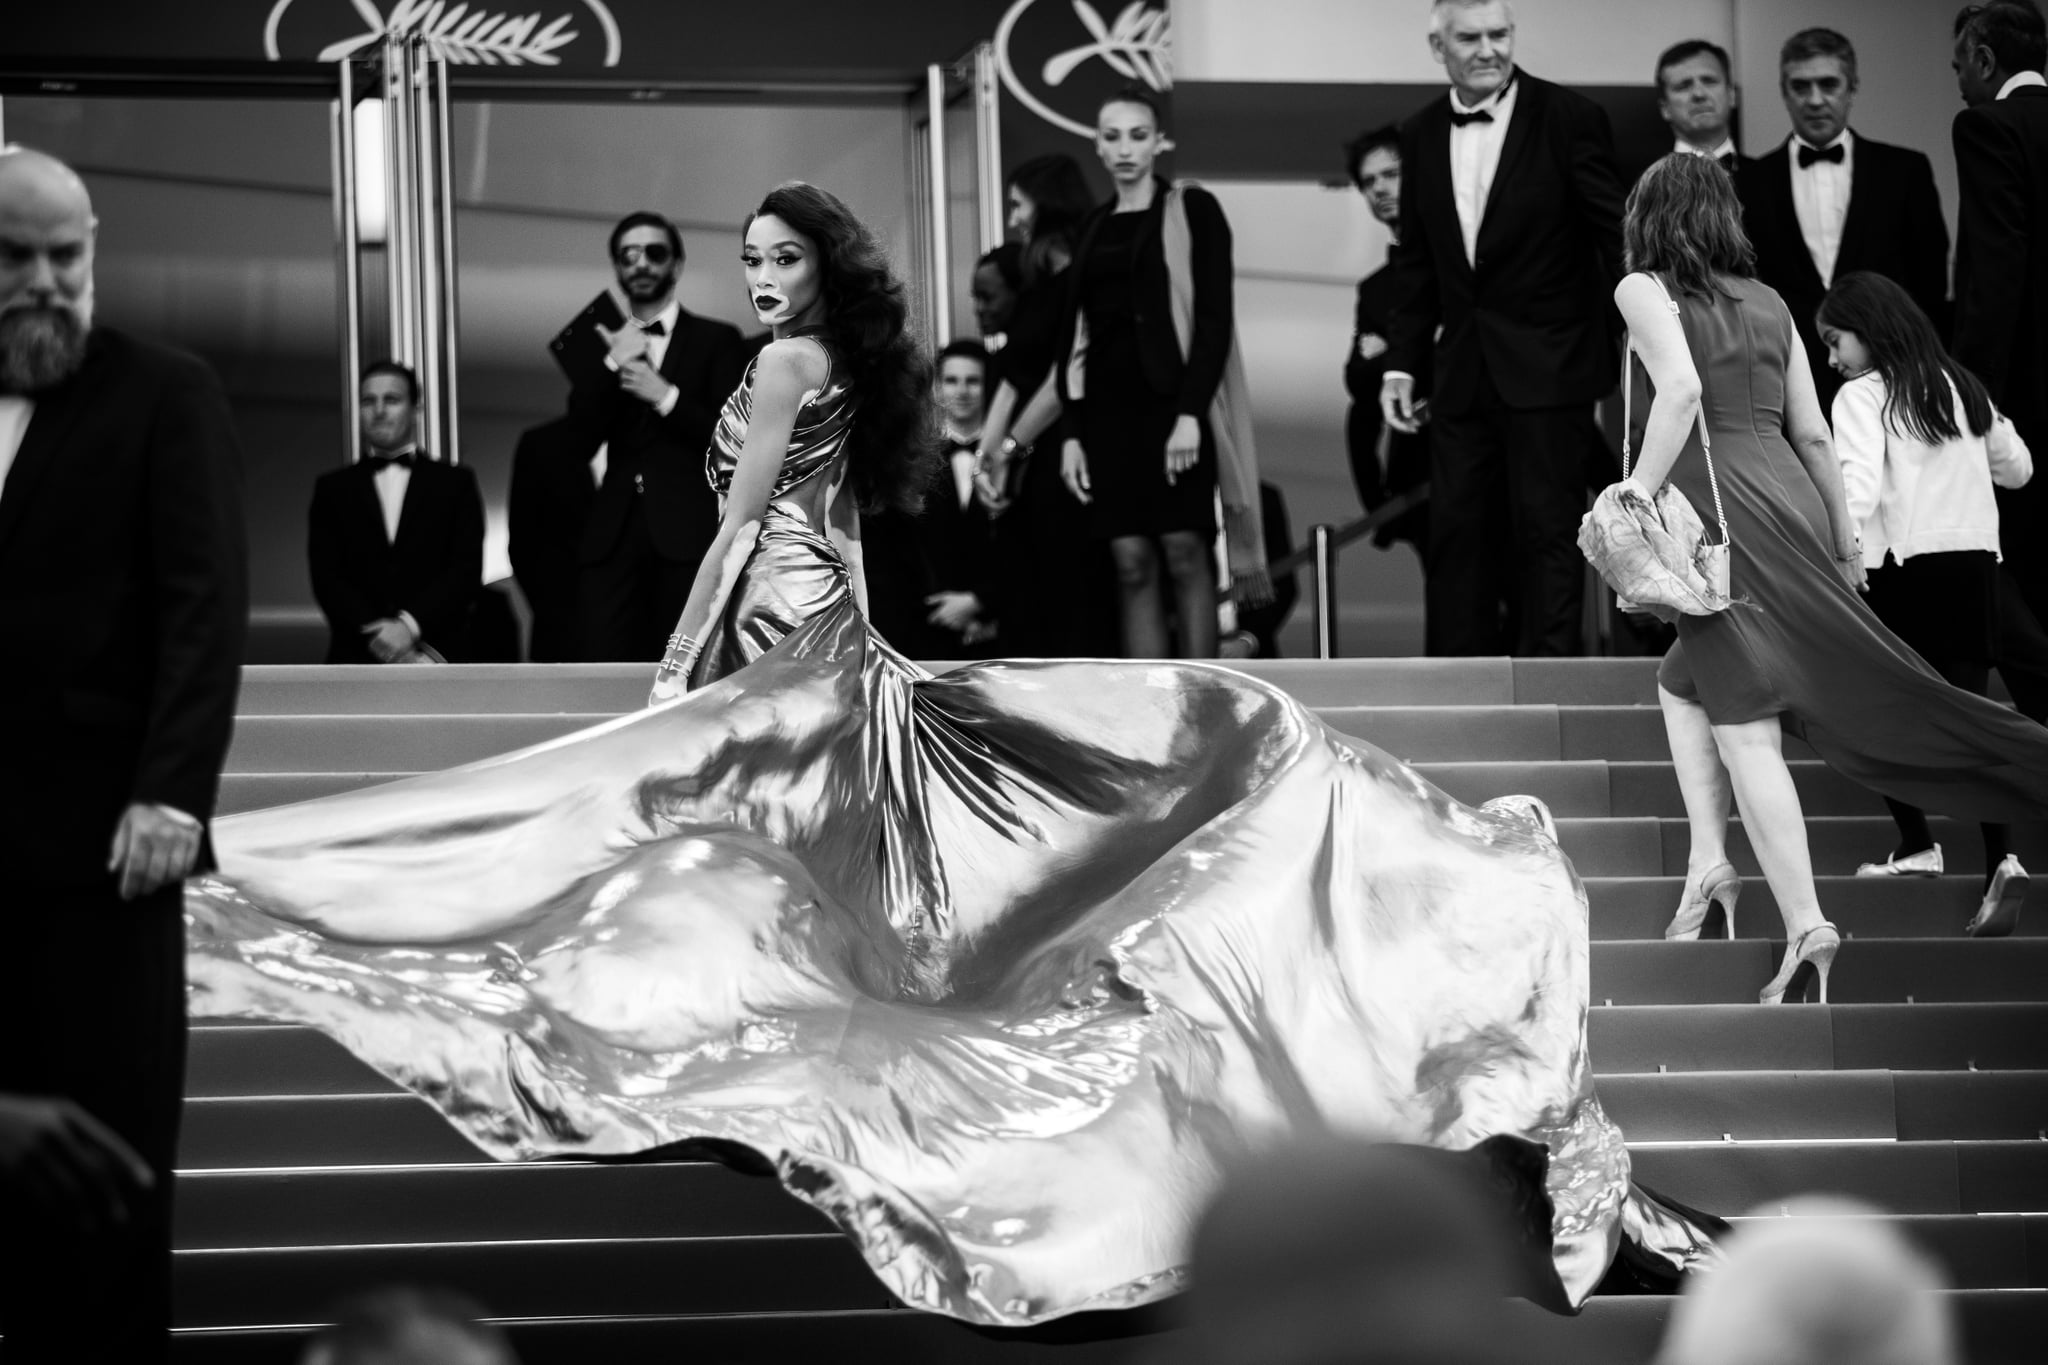 Pictured: Lea Seydoux, These Stunning Black and White Cannes Film Festival  Photos Look Like an Ad Campaign